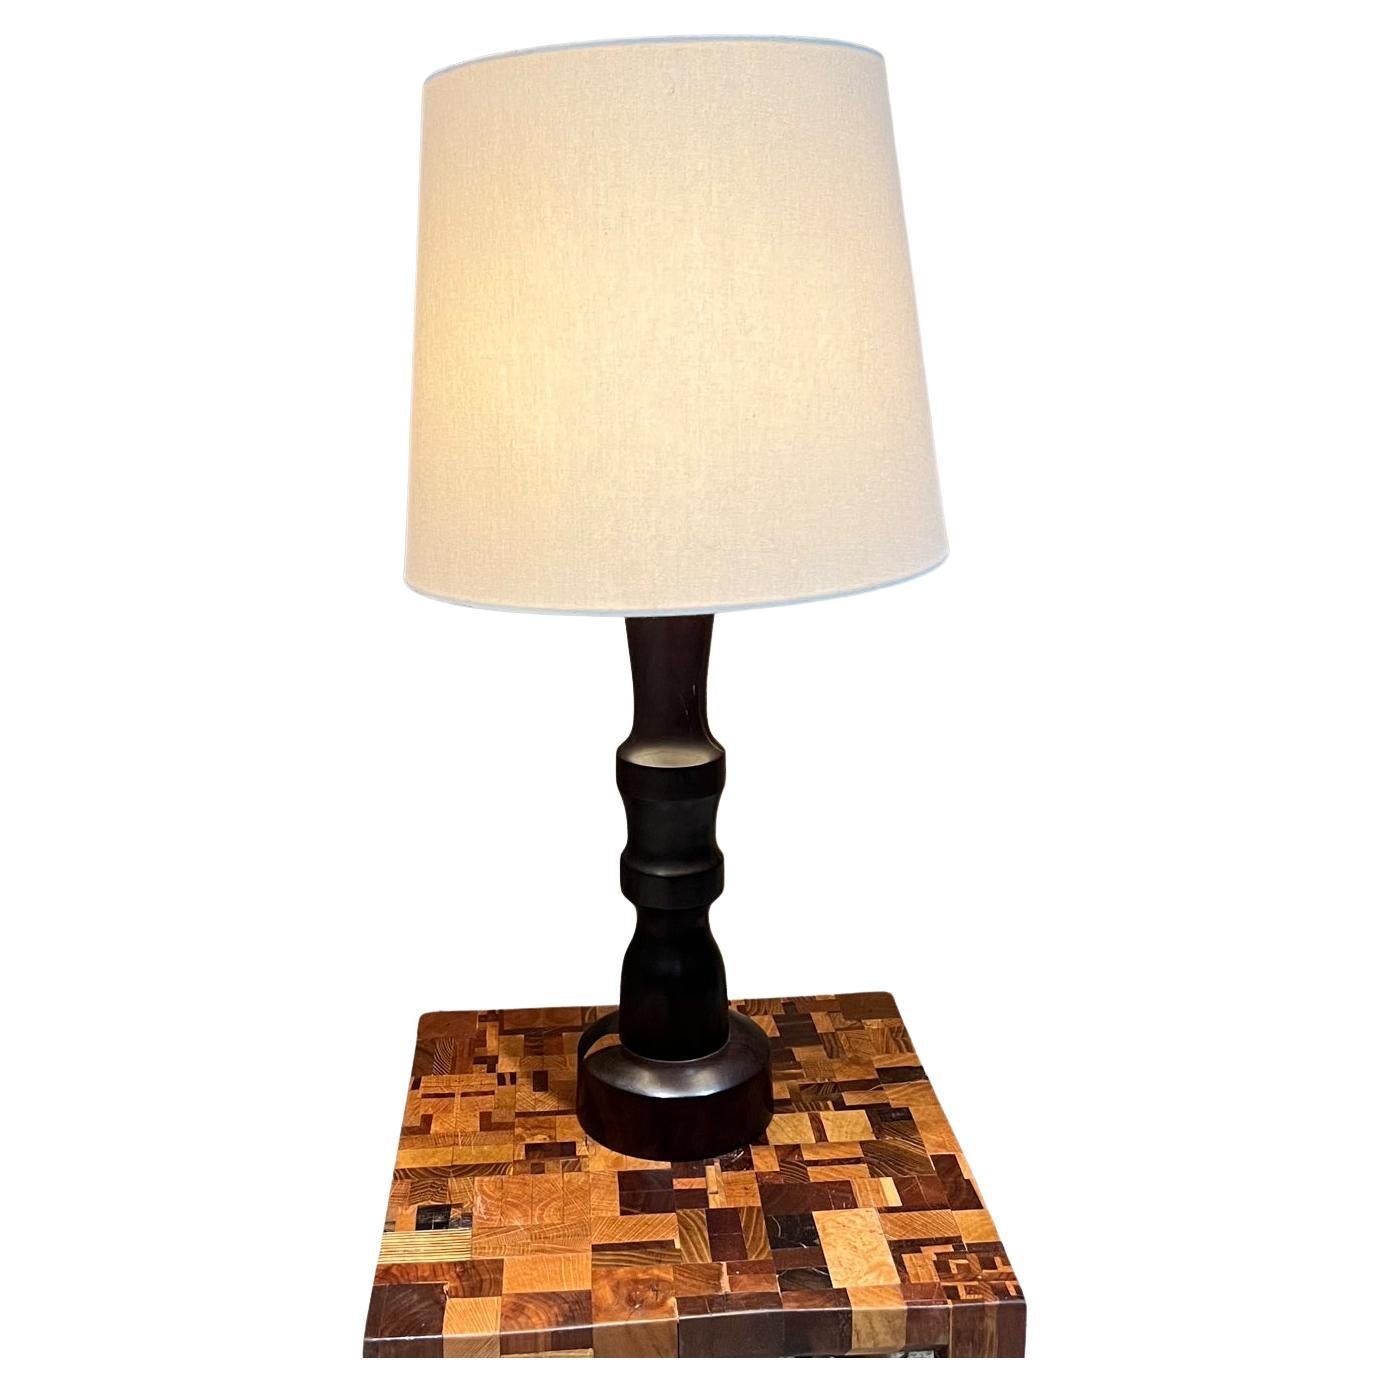 1950s Sculptural Spindle Table Lamp in Mexican Palo Fierro Desert Ironwood